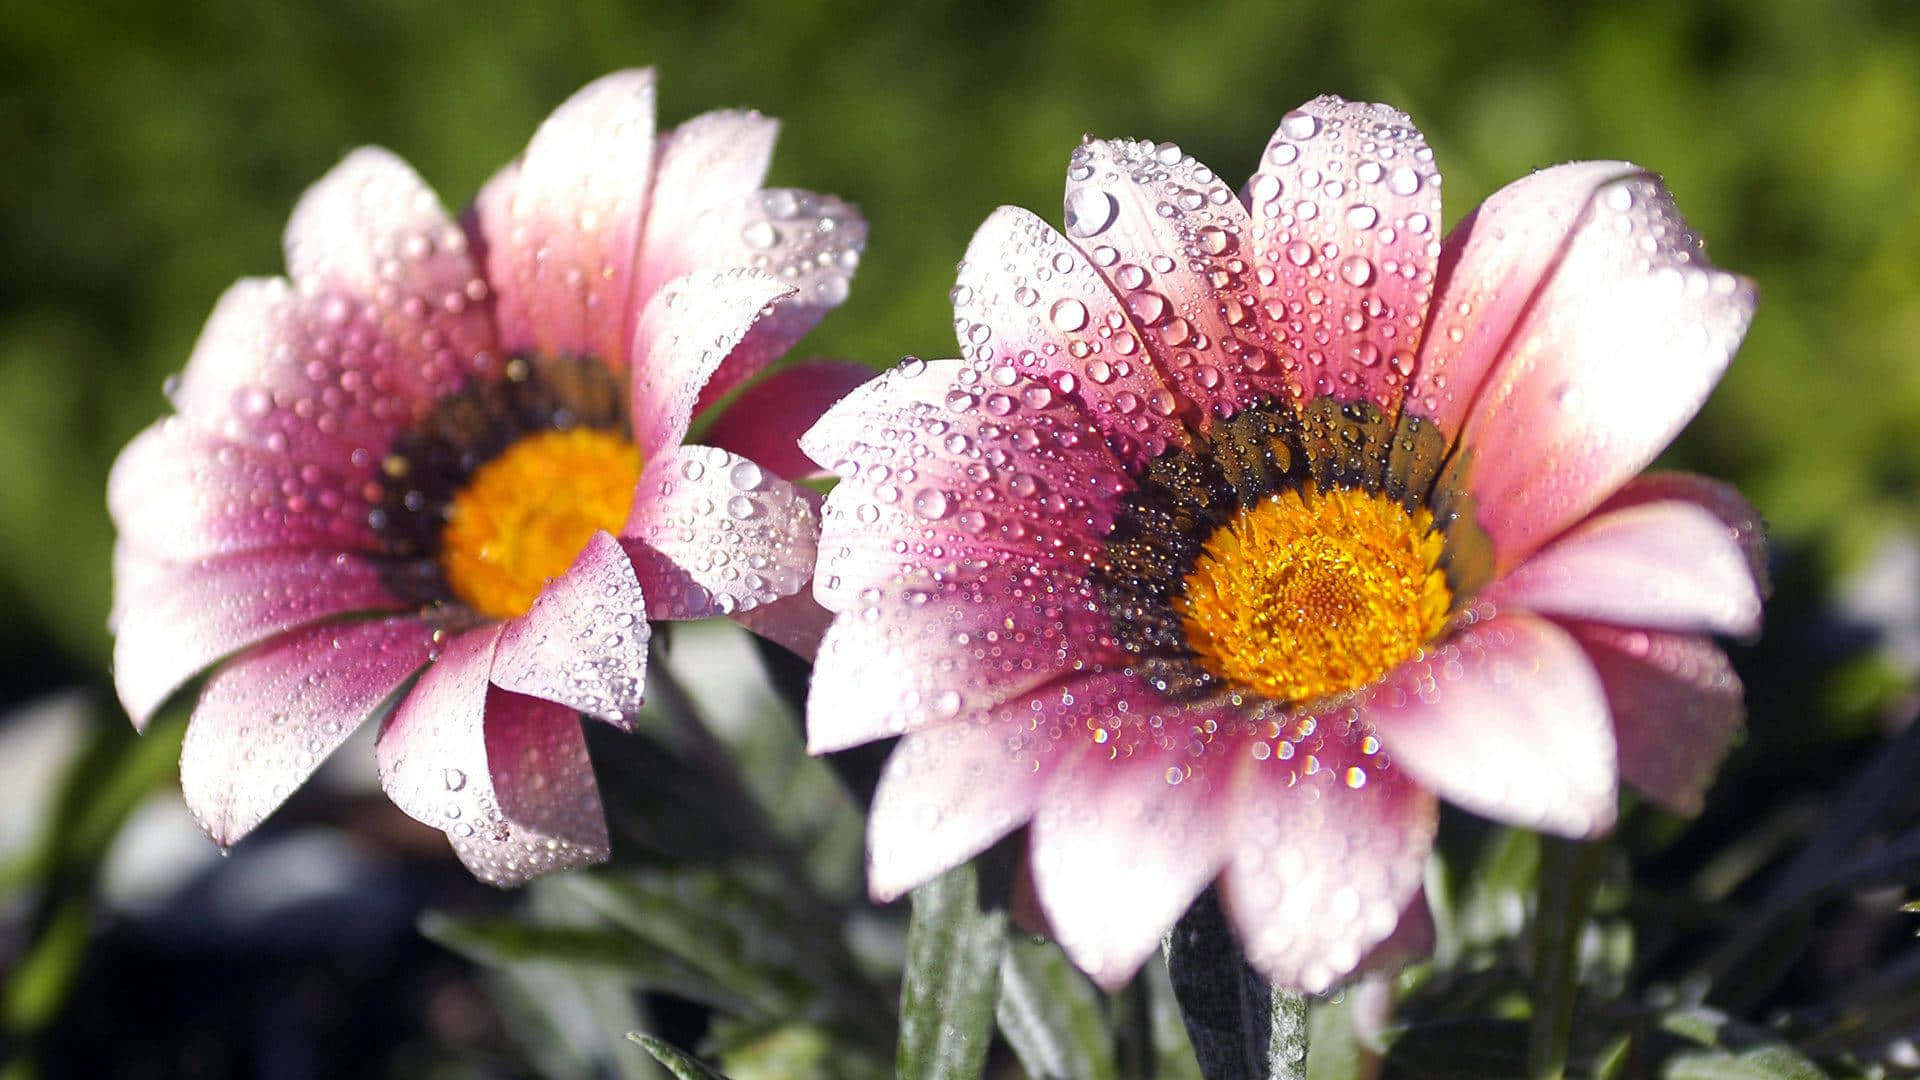 Two Pink Flowers With Water Droplets On Them